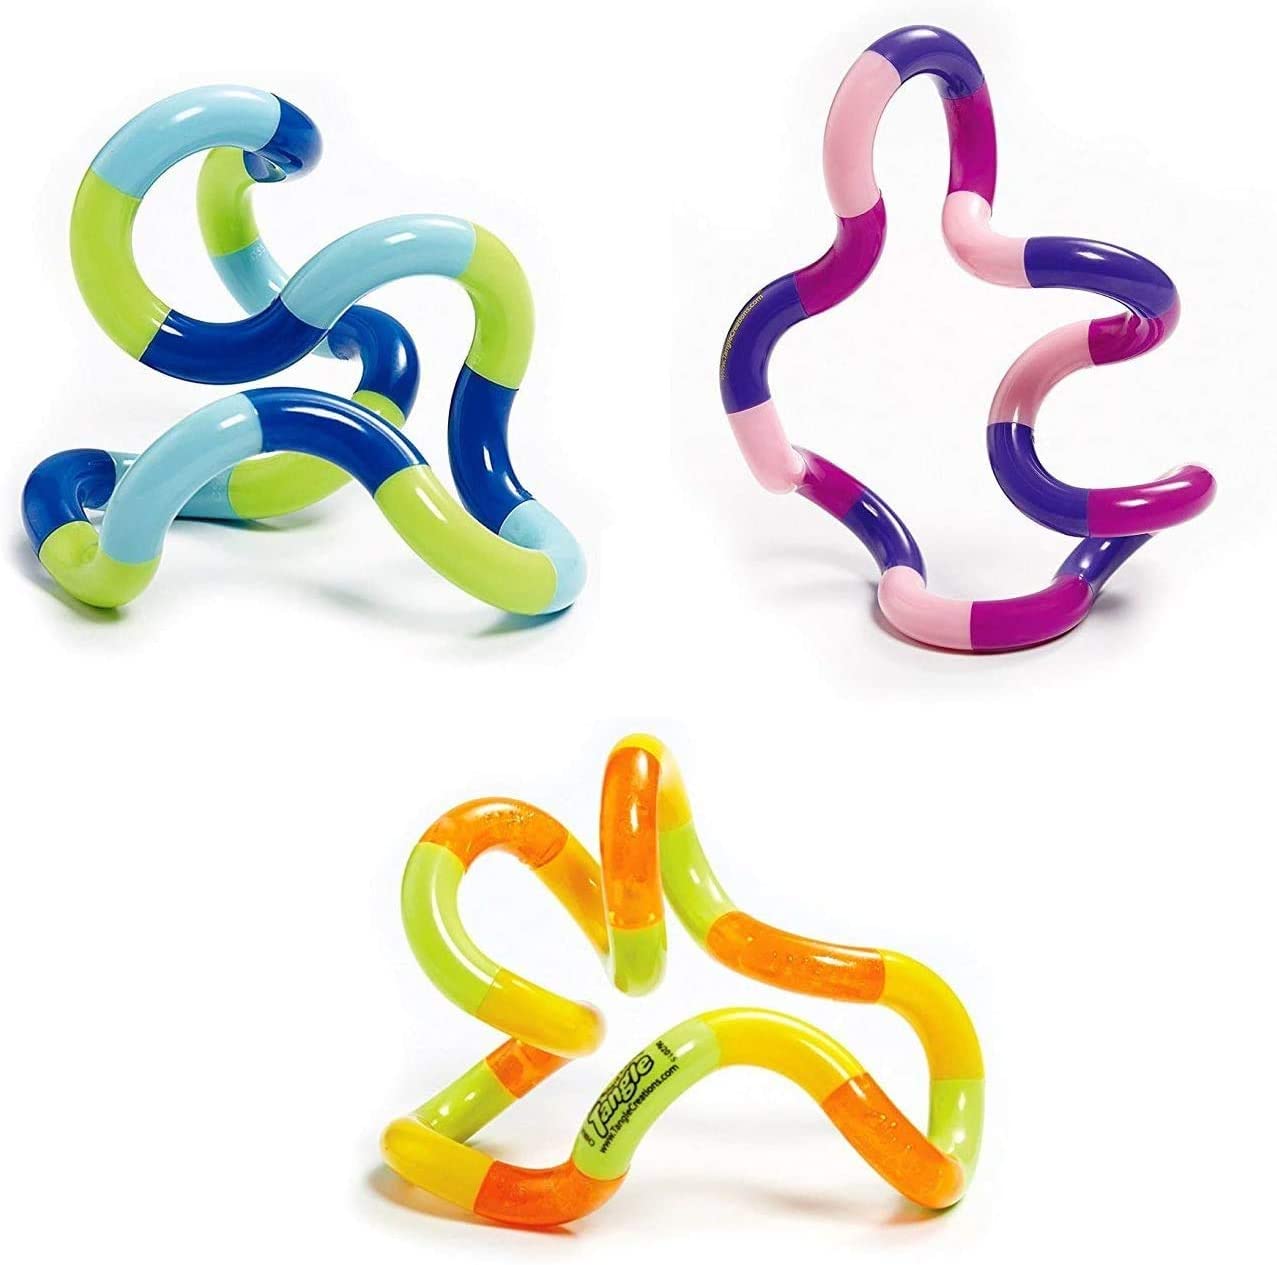 Tangle Fidget Toy-Best Fidget Pack Toys for Anxiety